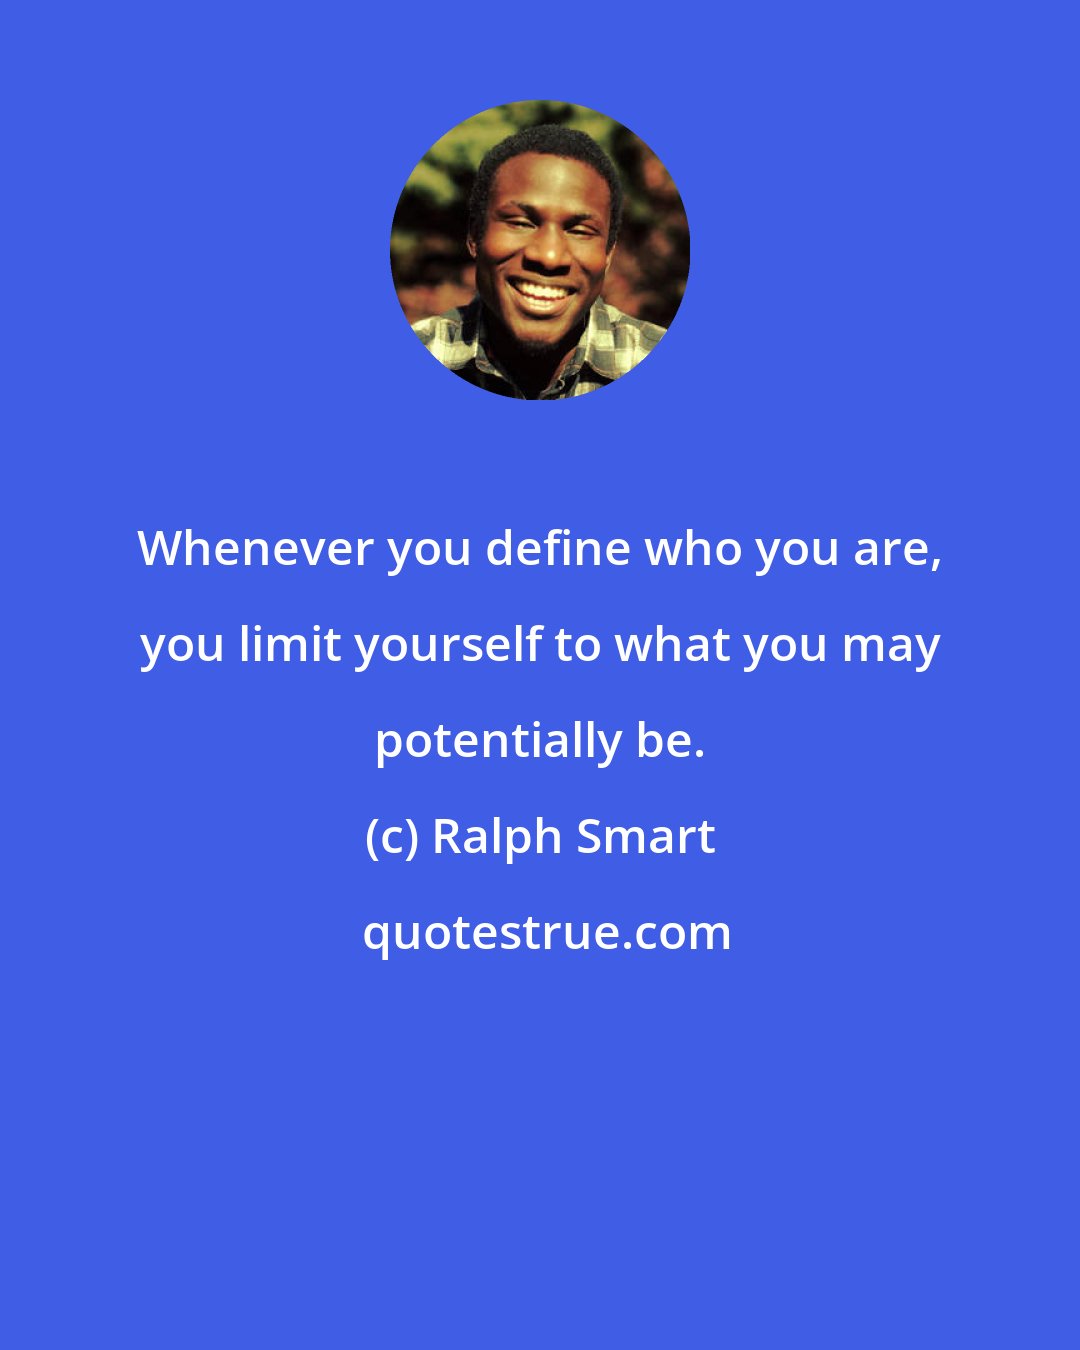 Ralph Smart: Whenever you define who you are, you limit yourself to what you may potentially be.